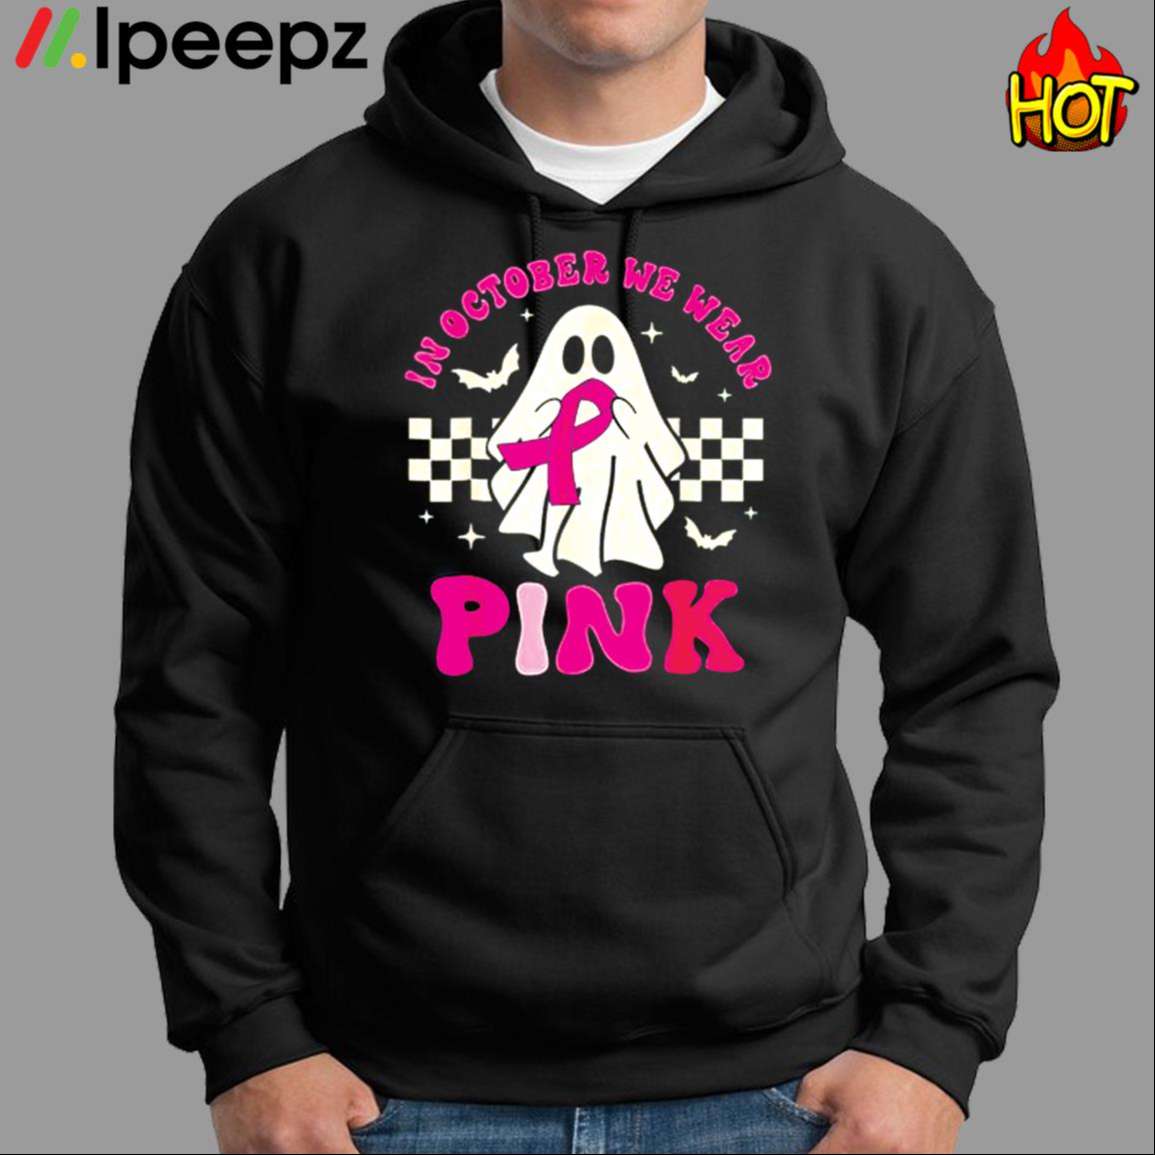 On Wednesday We Wear Pink Cute Ghost Halloween Breast Cancer Awareness Shirt,  hoodie, sweater, long sleeve and tank top